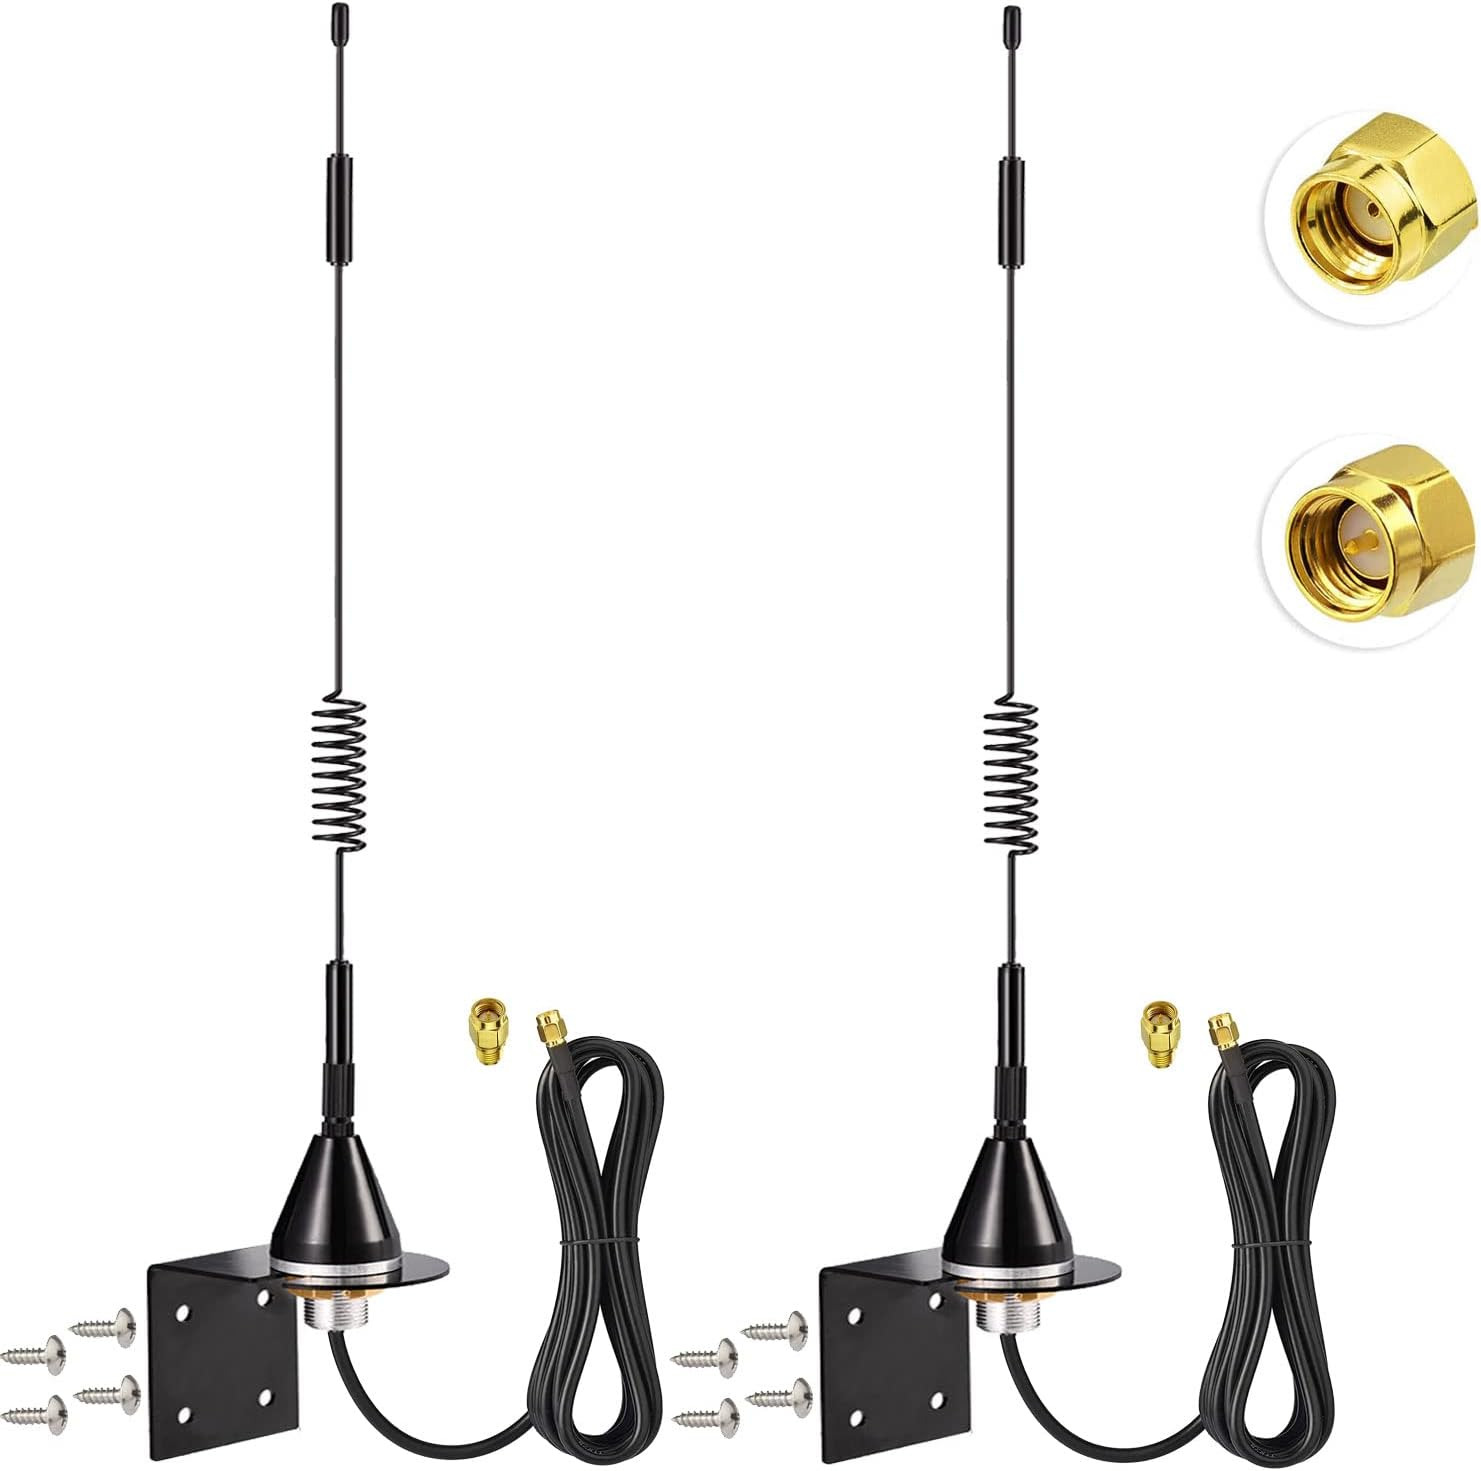 4G LTE RP SMA Cellular Antenna 7Dbi Outdoor Antenna (2 Pack) Compatible with 